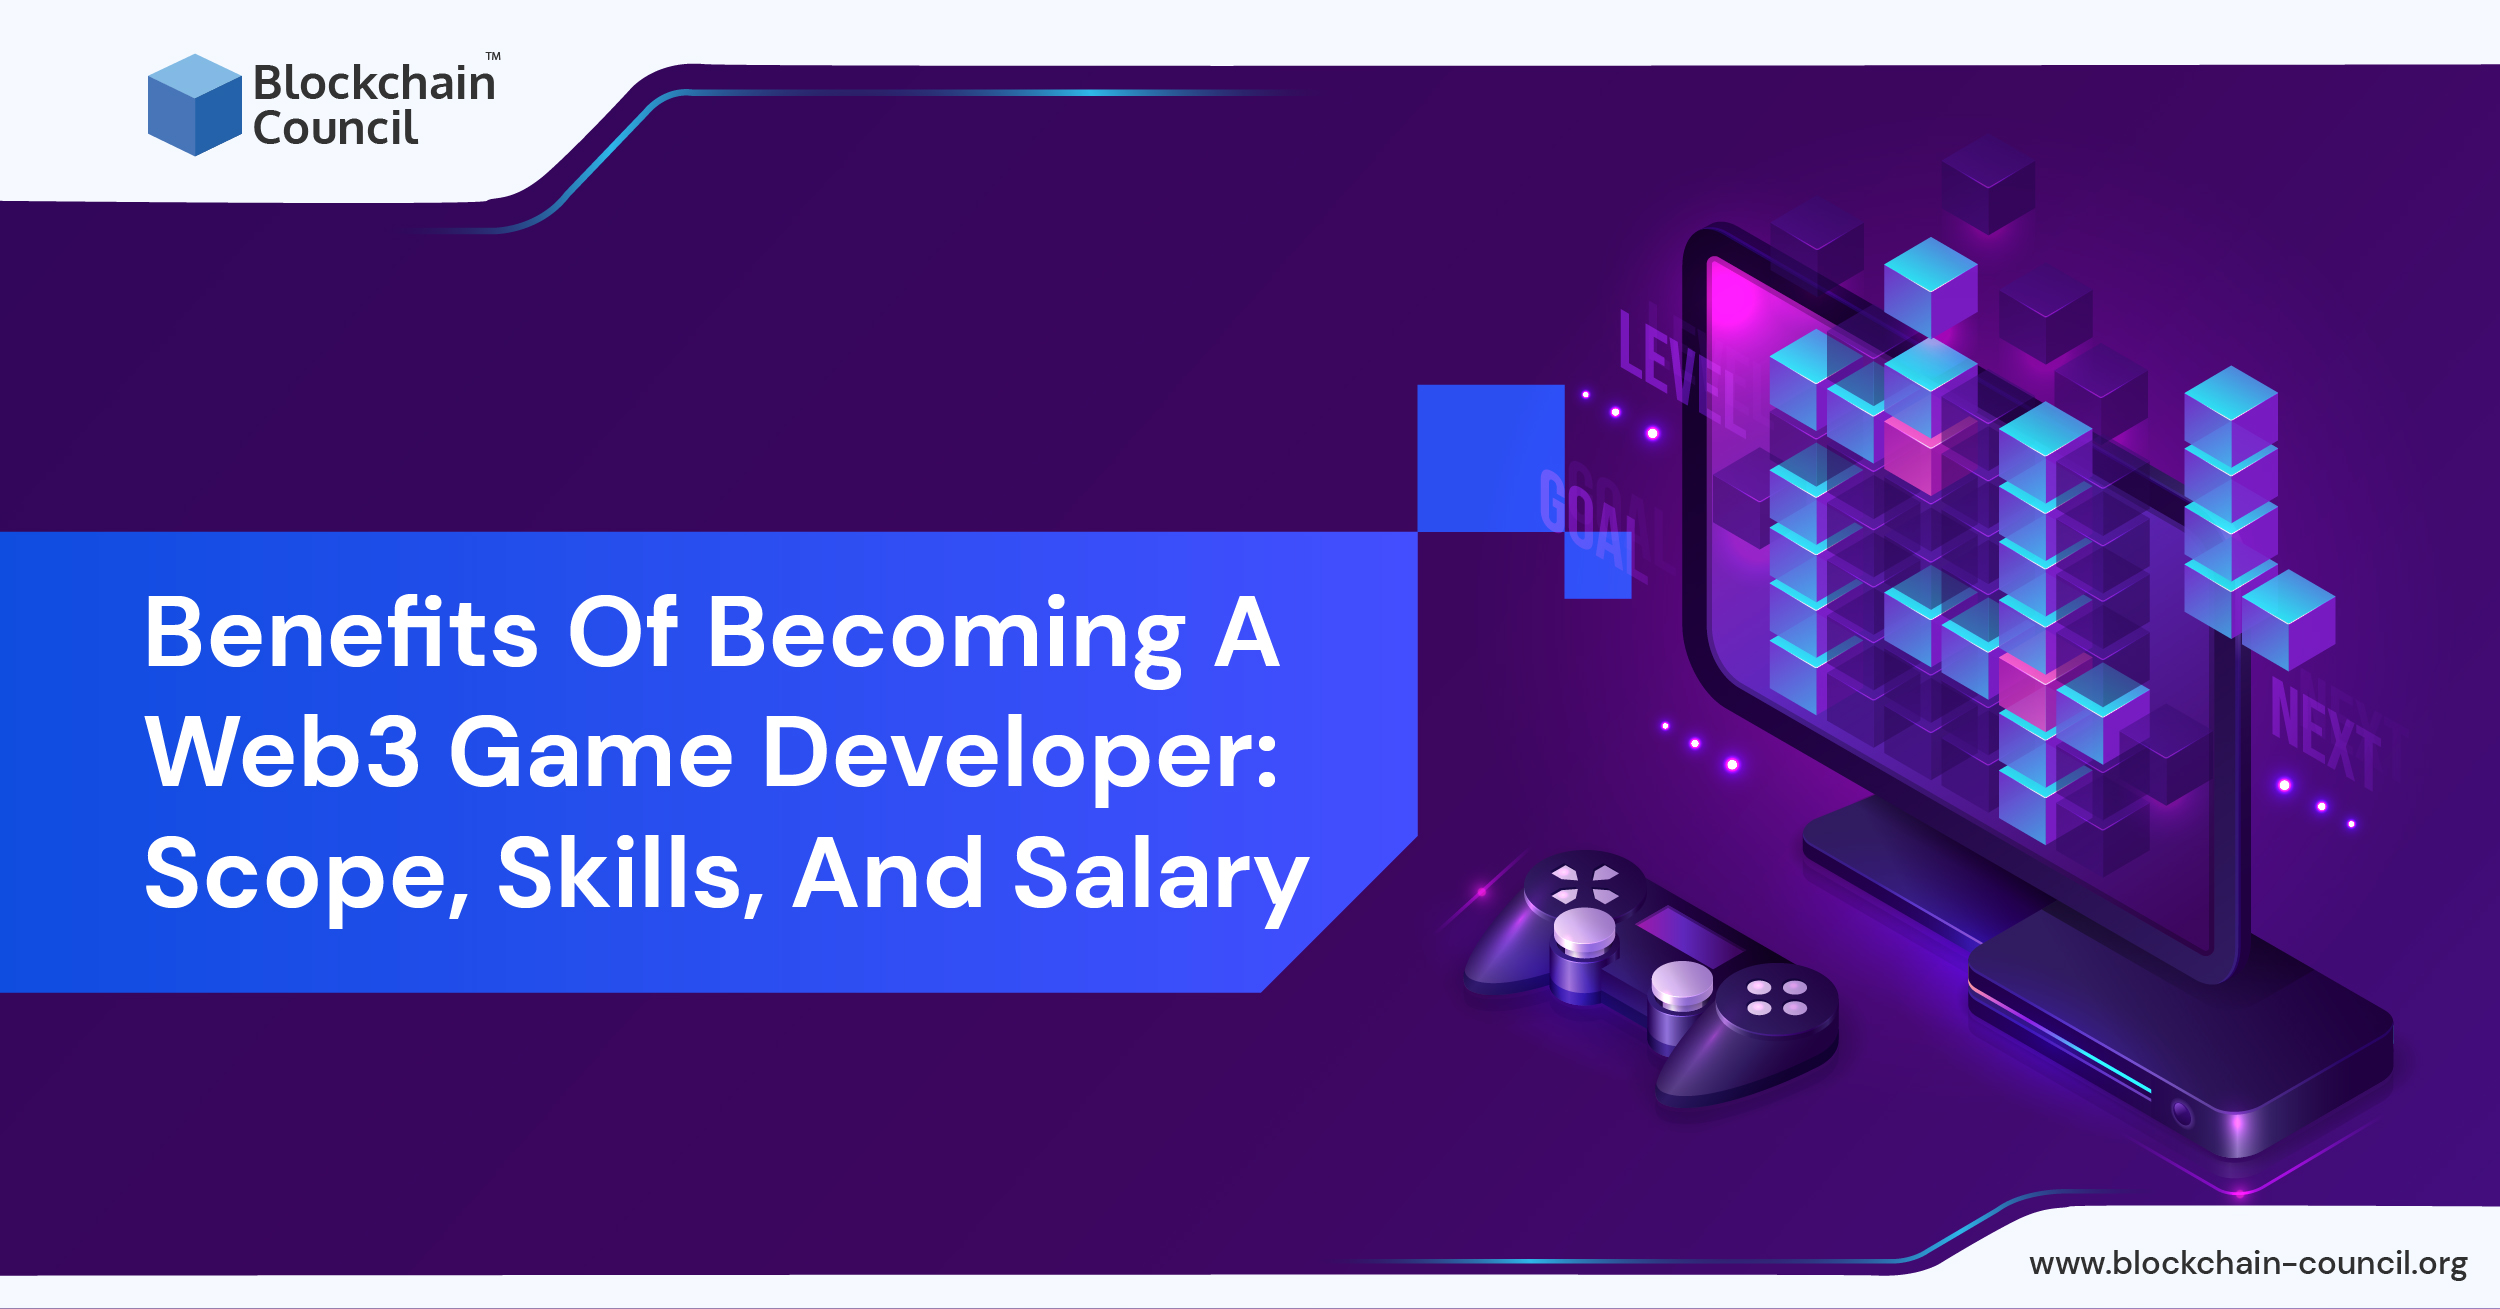 Benefits of becoming a Web3 Game Developer: Scope, Skills, and Salary